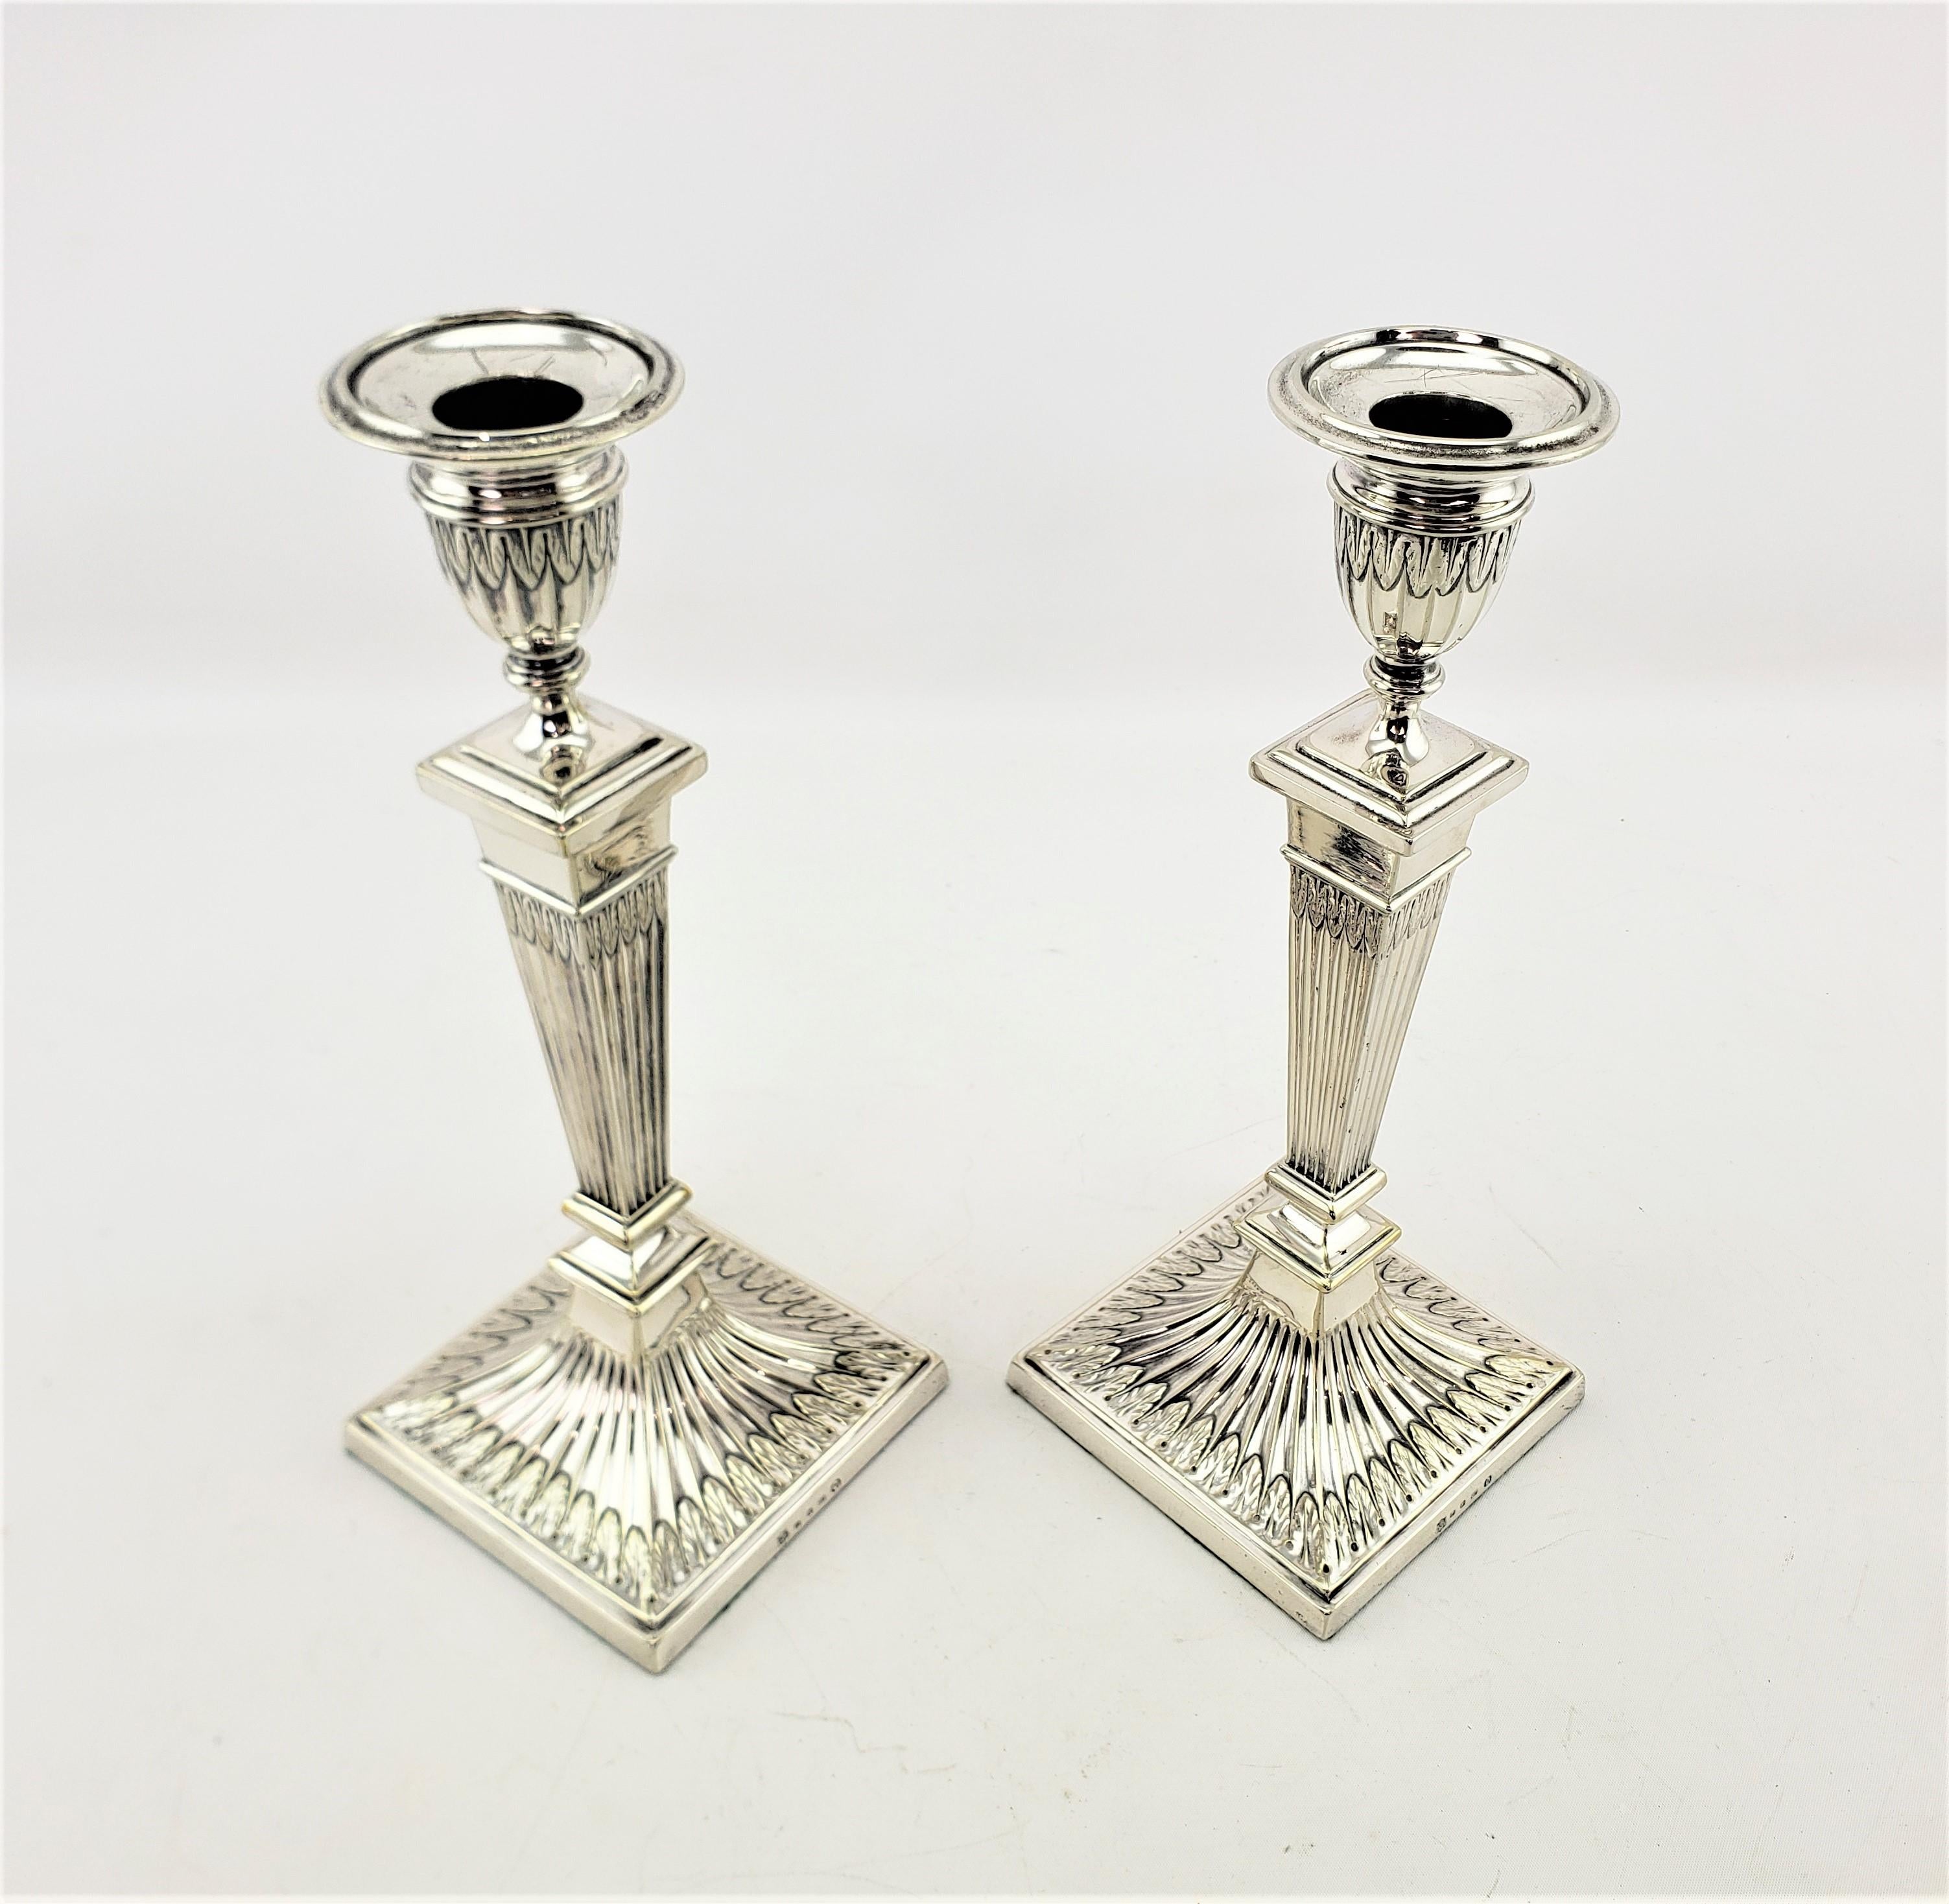 Pair of Antique Elkington Silver Plated Column Candlesticks with Leaf Decoration In Good Condition For Sale In Hamilton, Ontario